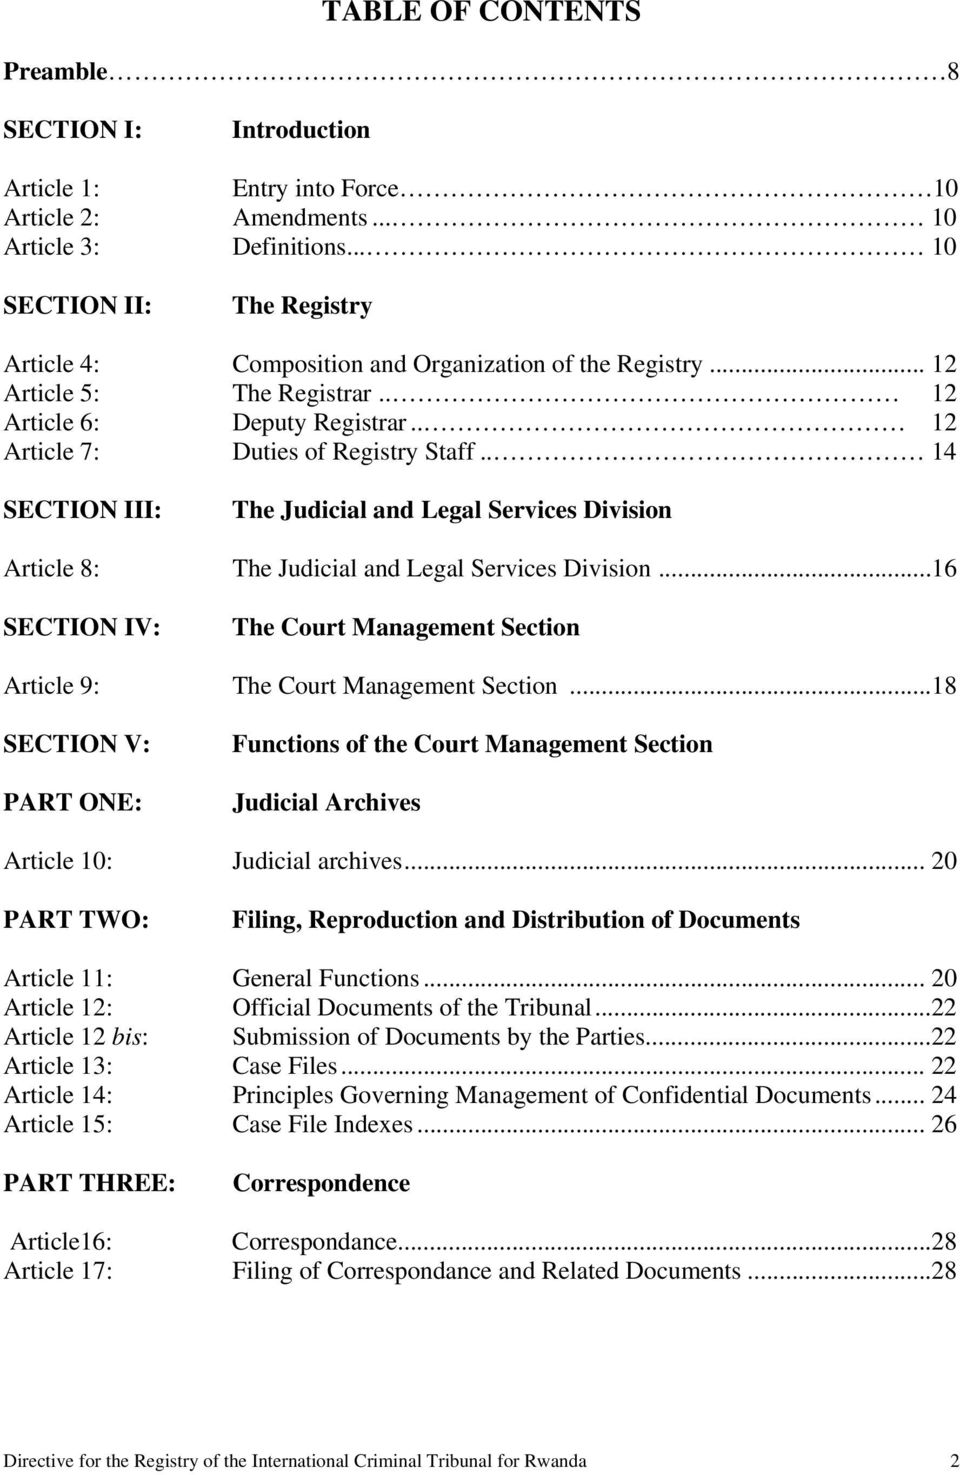 . 14 SECTION III: The Judicial and Legal Services Division Article 8: The Judicial and Legal Services Division...16 SECTION IV: The Court Management Section Article 9: The Court Management Section.